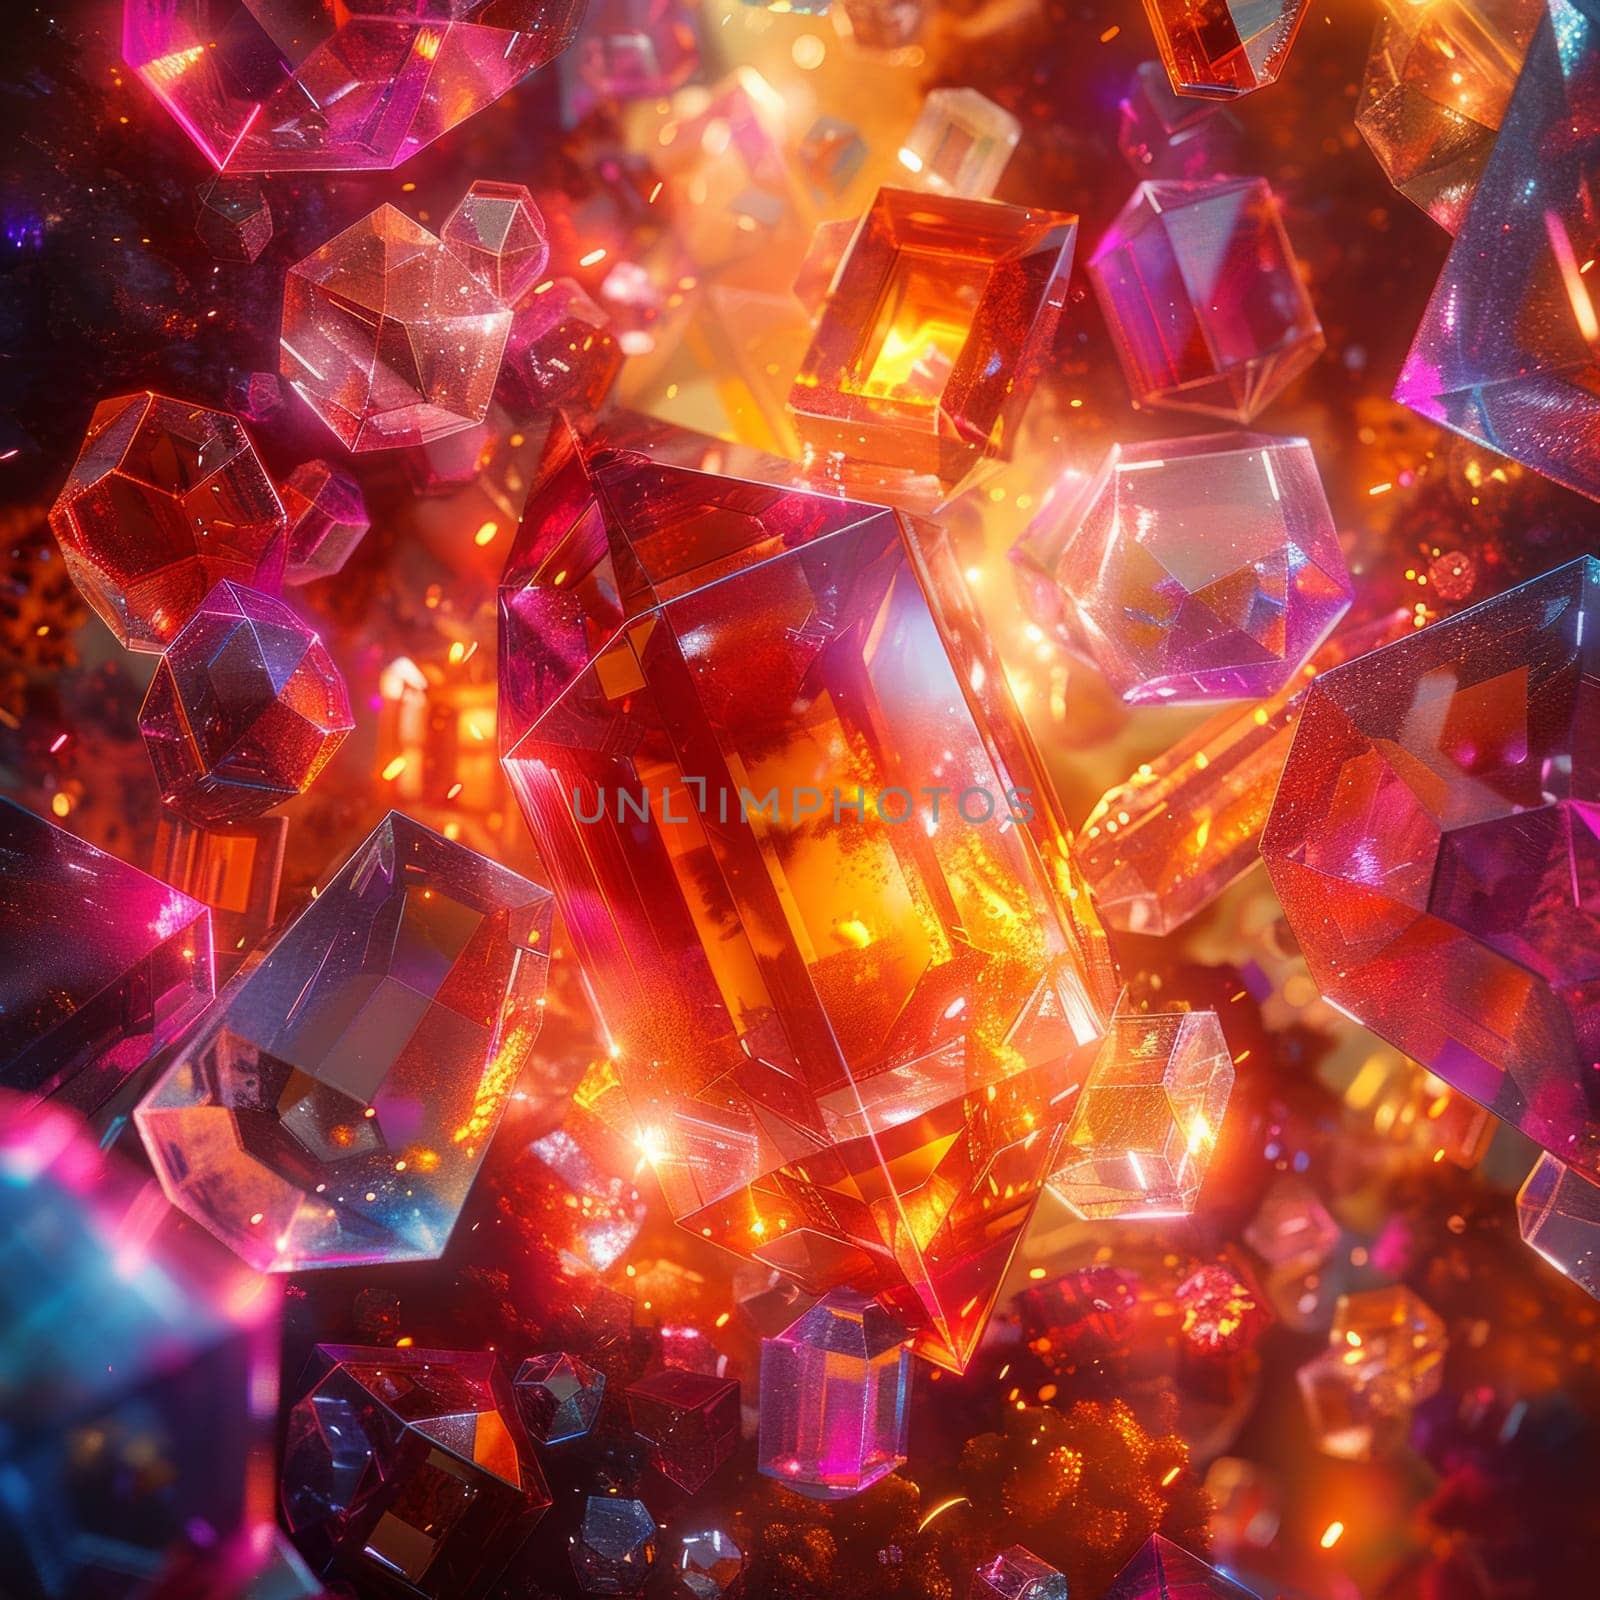 A collection of vibrant, multicolored crystals suspended in the air, creating a mesmerizing display of light and color against a backdrop of glass.